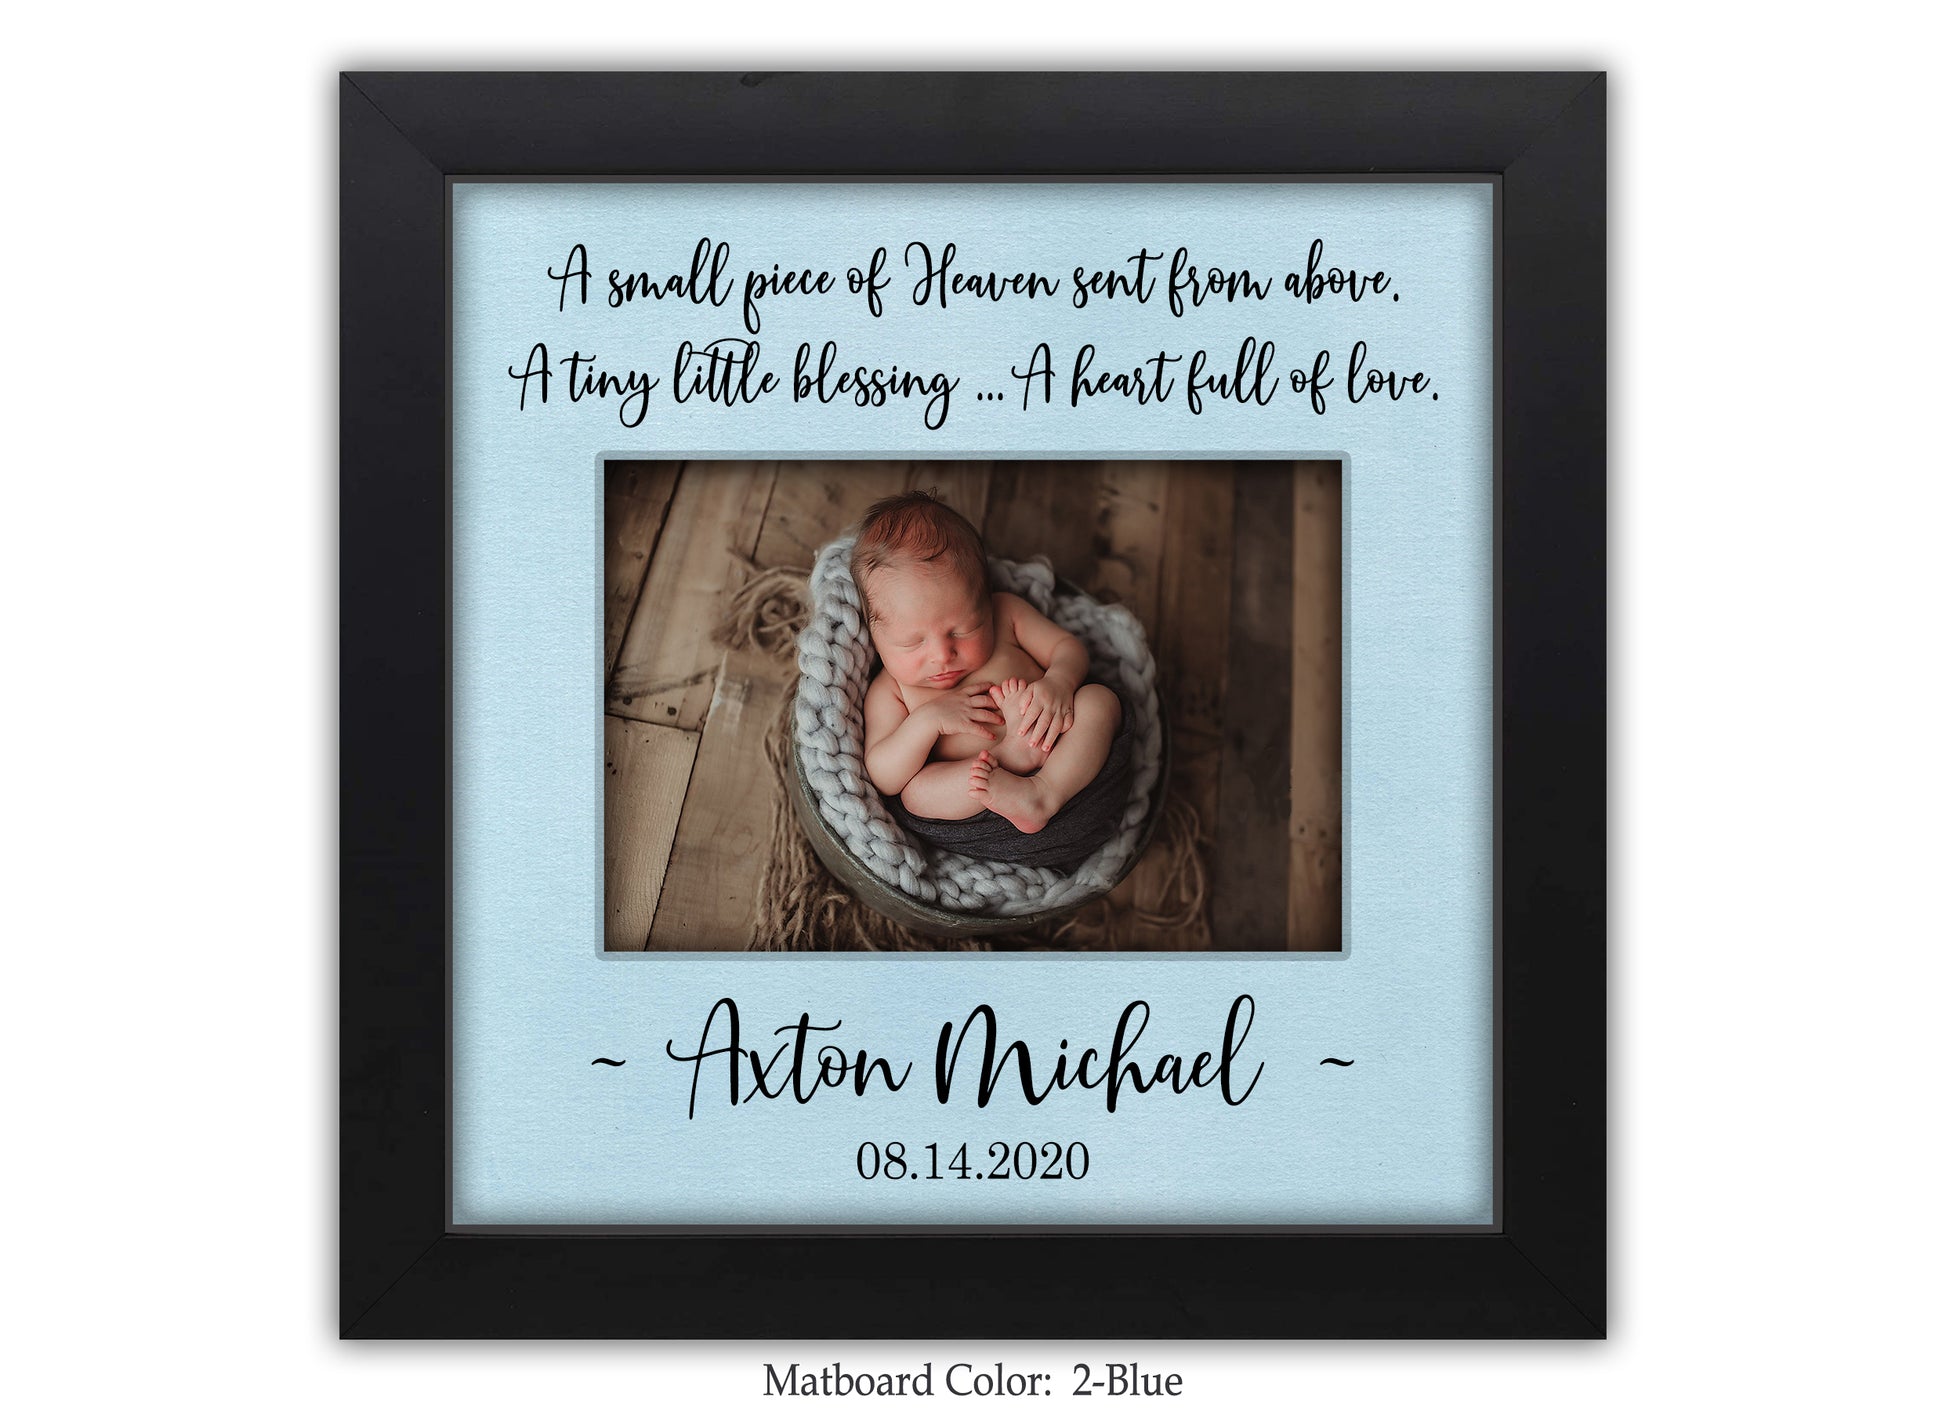 Personalized New Baby Photo Frame - New Baby Baptism Christening Gift, 8x8 Picture Frame MatboardMemories   